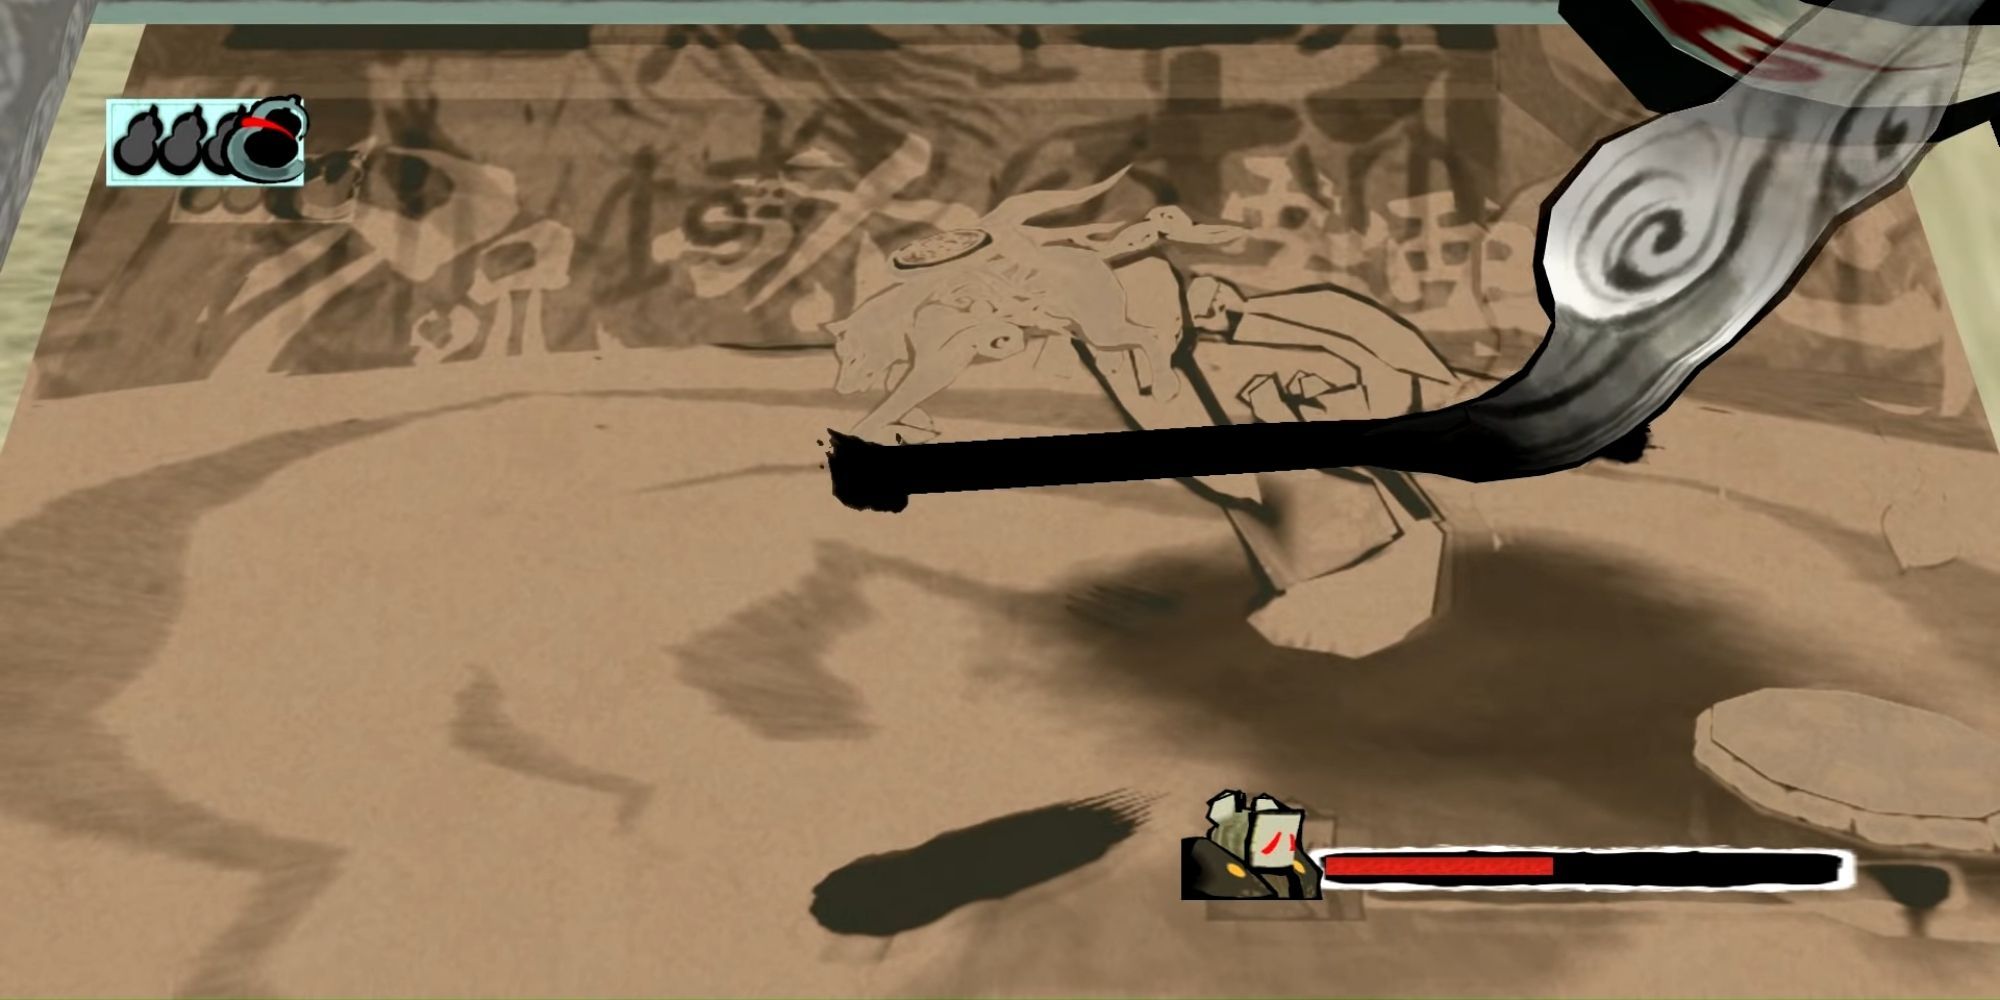 In Okami, spells can be cast using the celestial brush